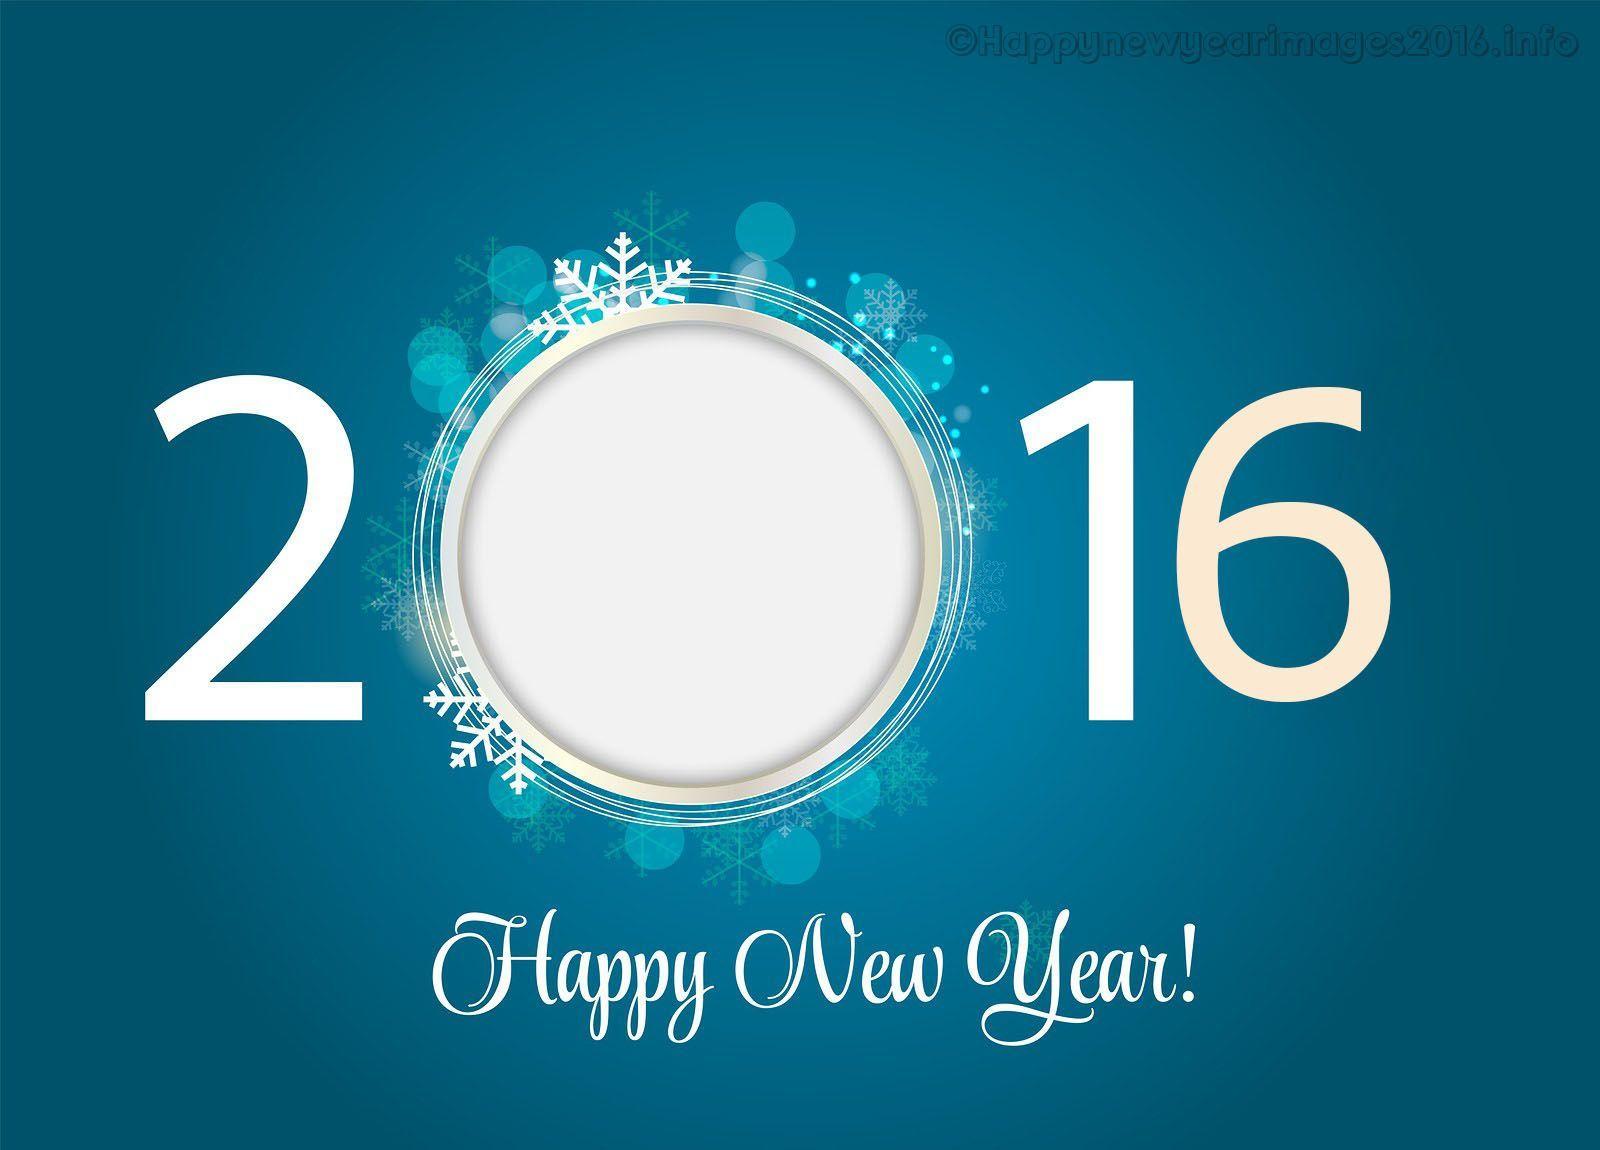 Best and Cute Happy New Year Wallpaper 2016. Happy New Year 2016